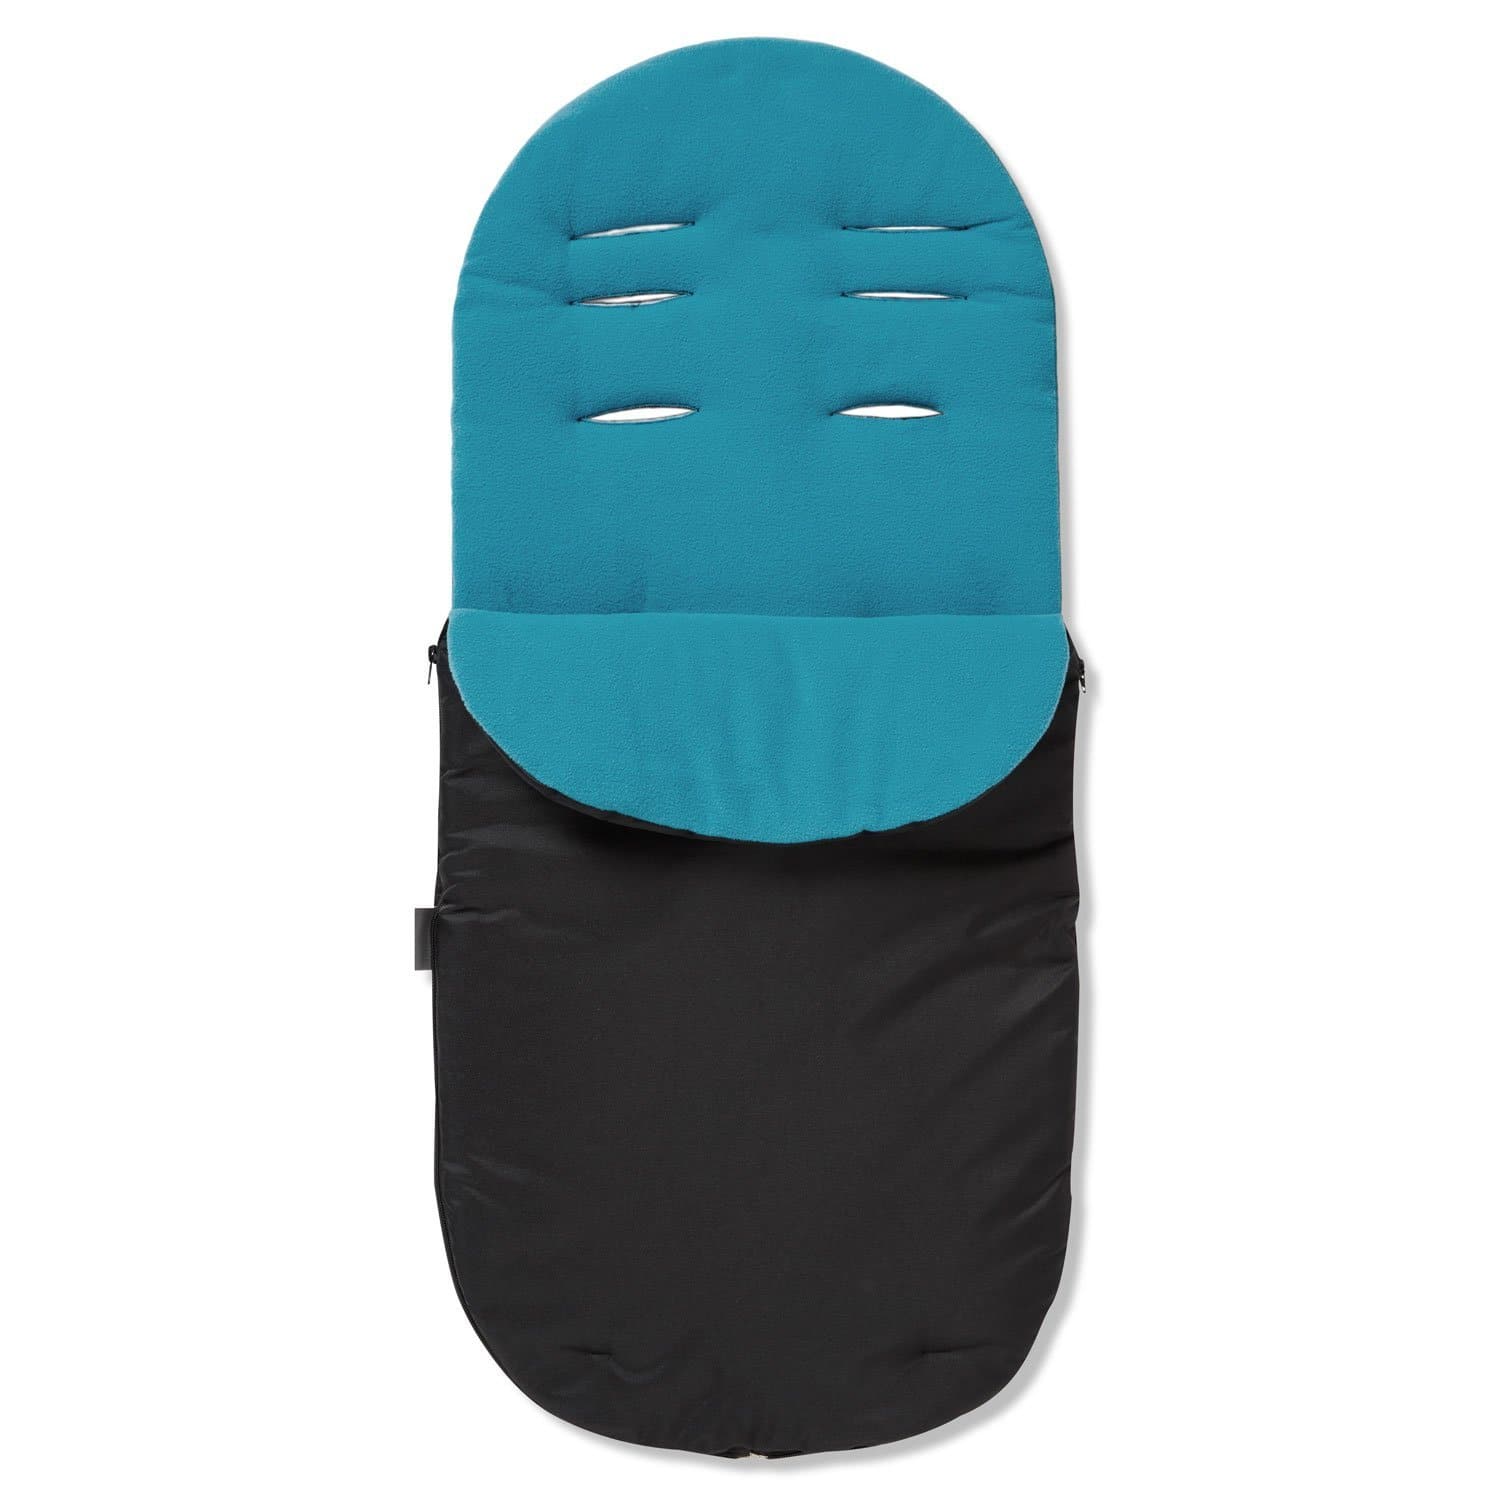 Footmuff / Cosy Toes Compatible with Red Kite - Turquoise / Fits All Models | For Your Little One